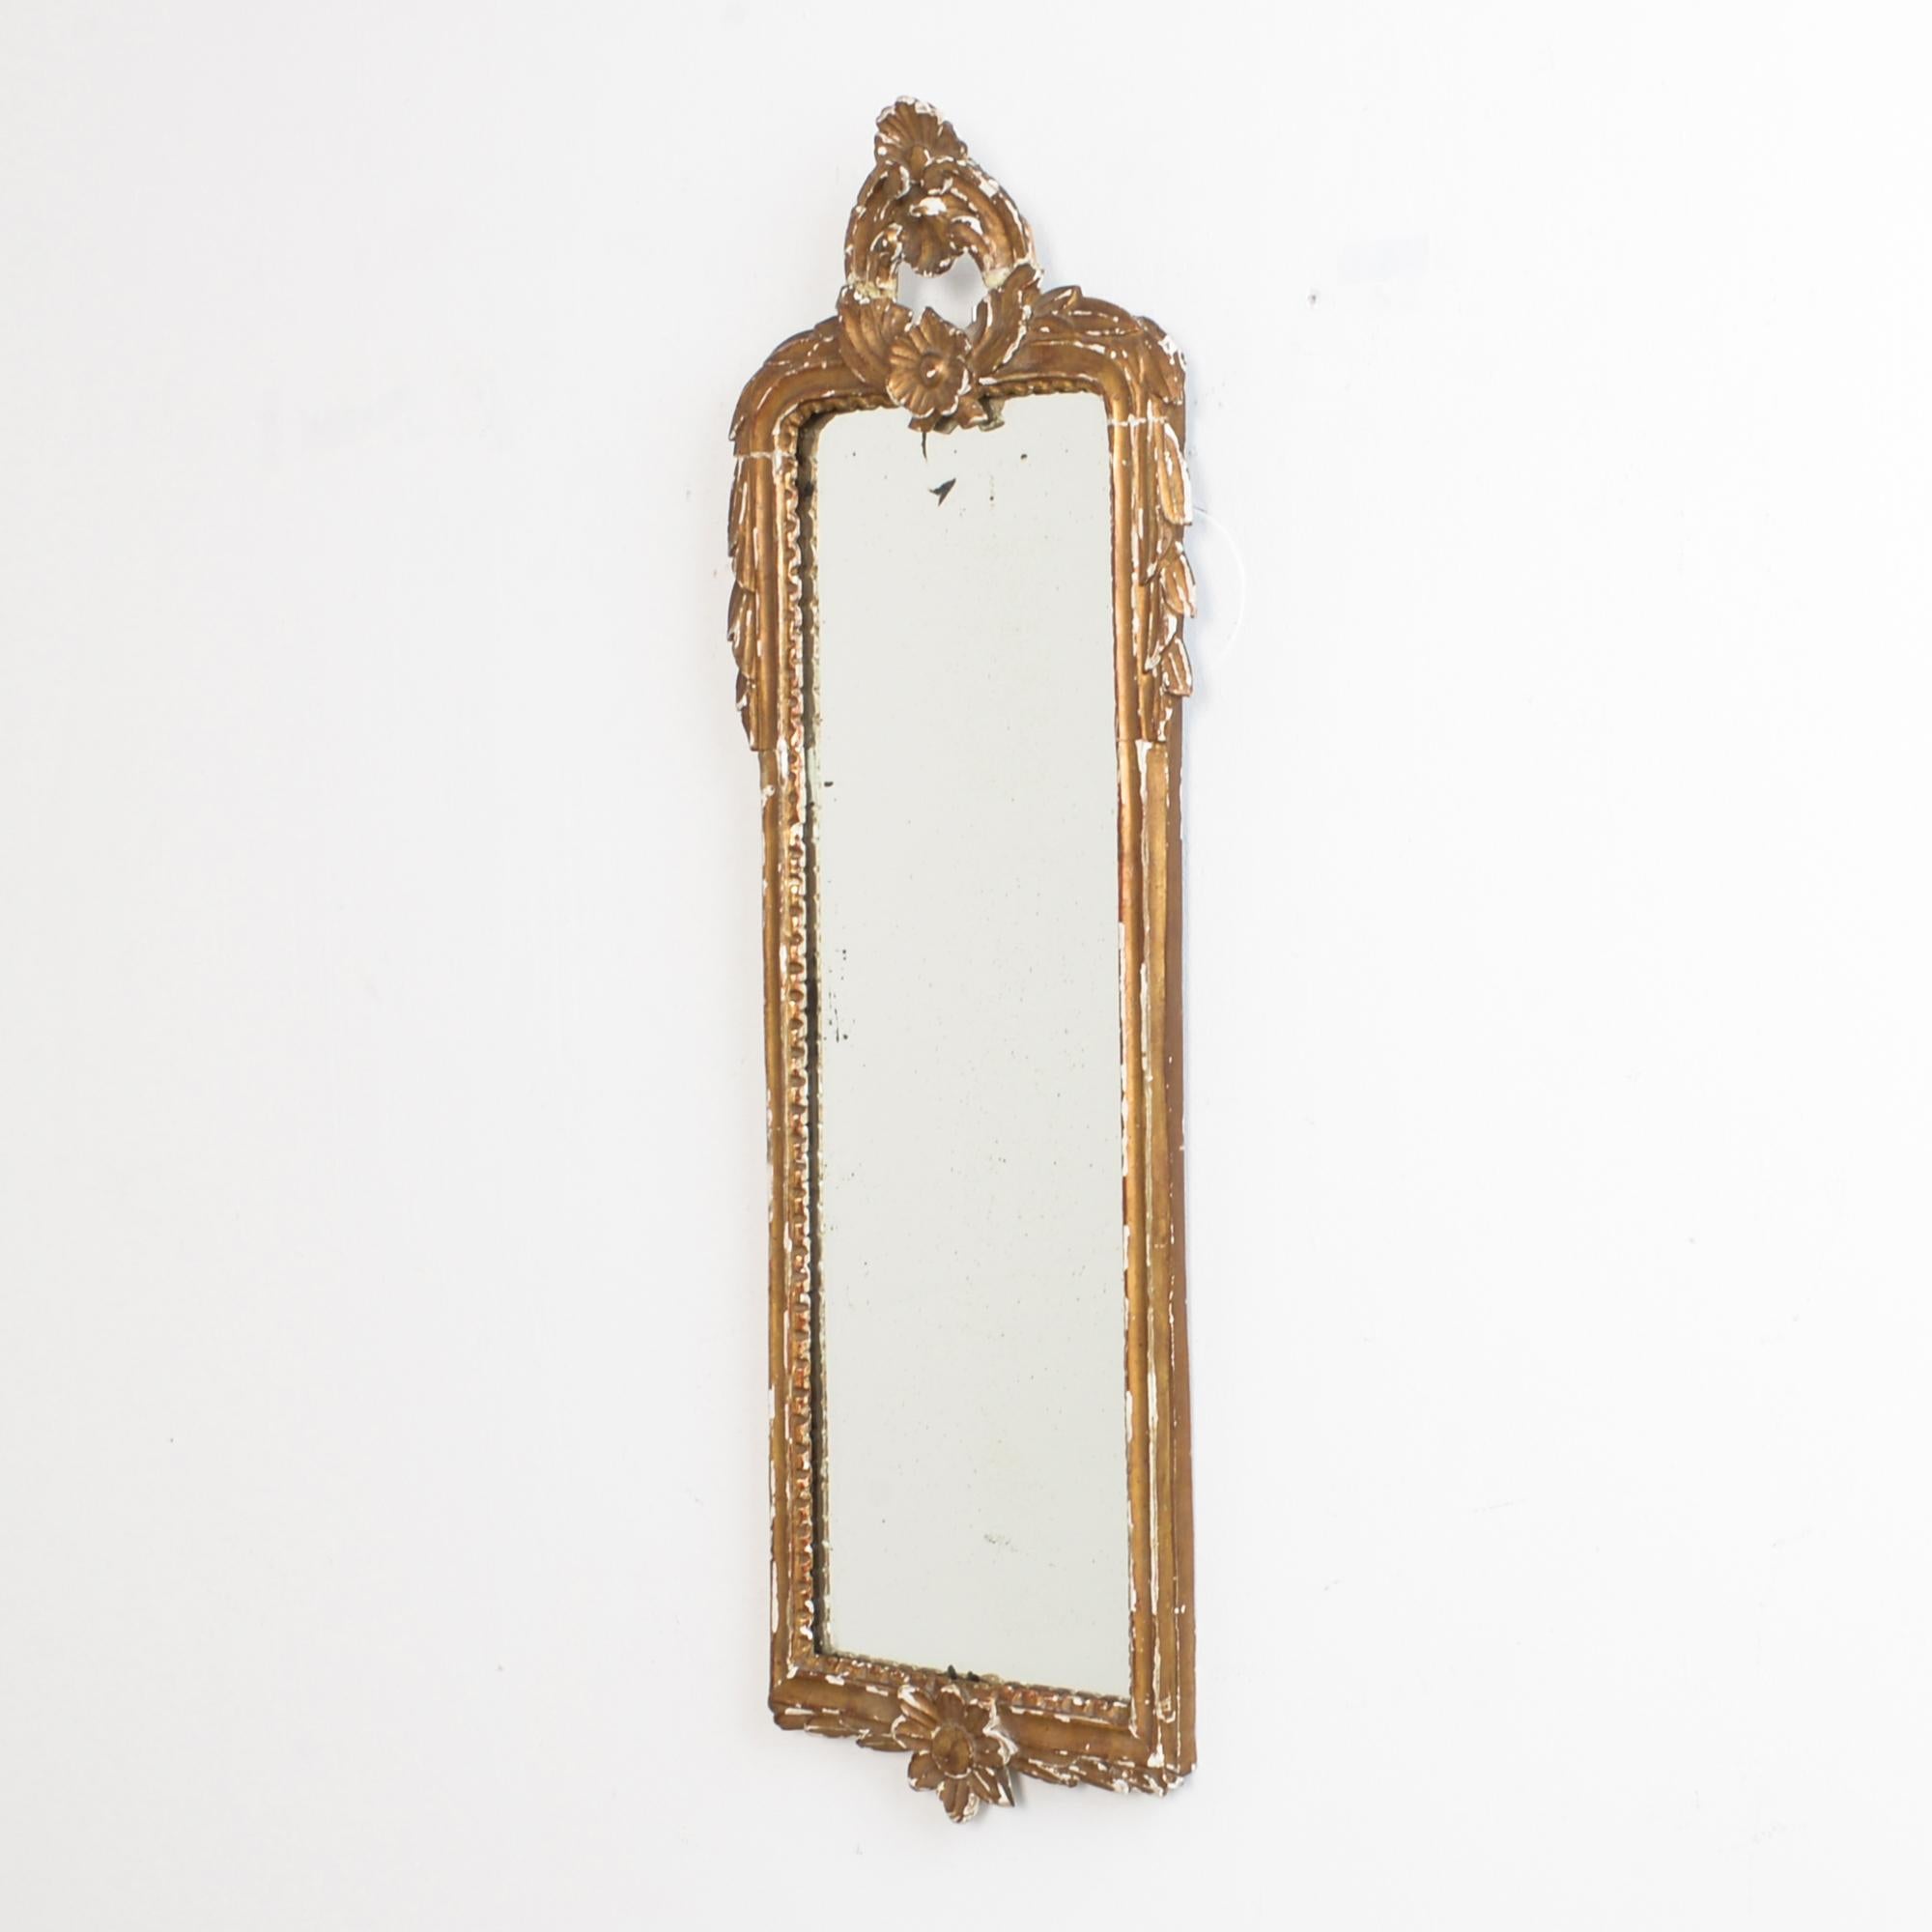 From France, circa 1910. A worn patina reveals the layers, a striking white plaster ground. Carved in an architectural style, floral elements accentuate the slender shape of the mirror. Affixed above and below the mirror is further framed with